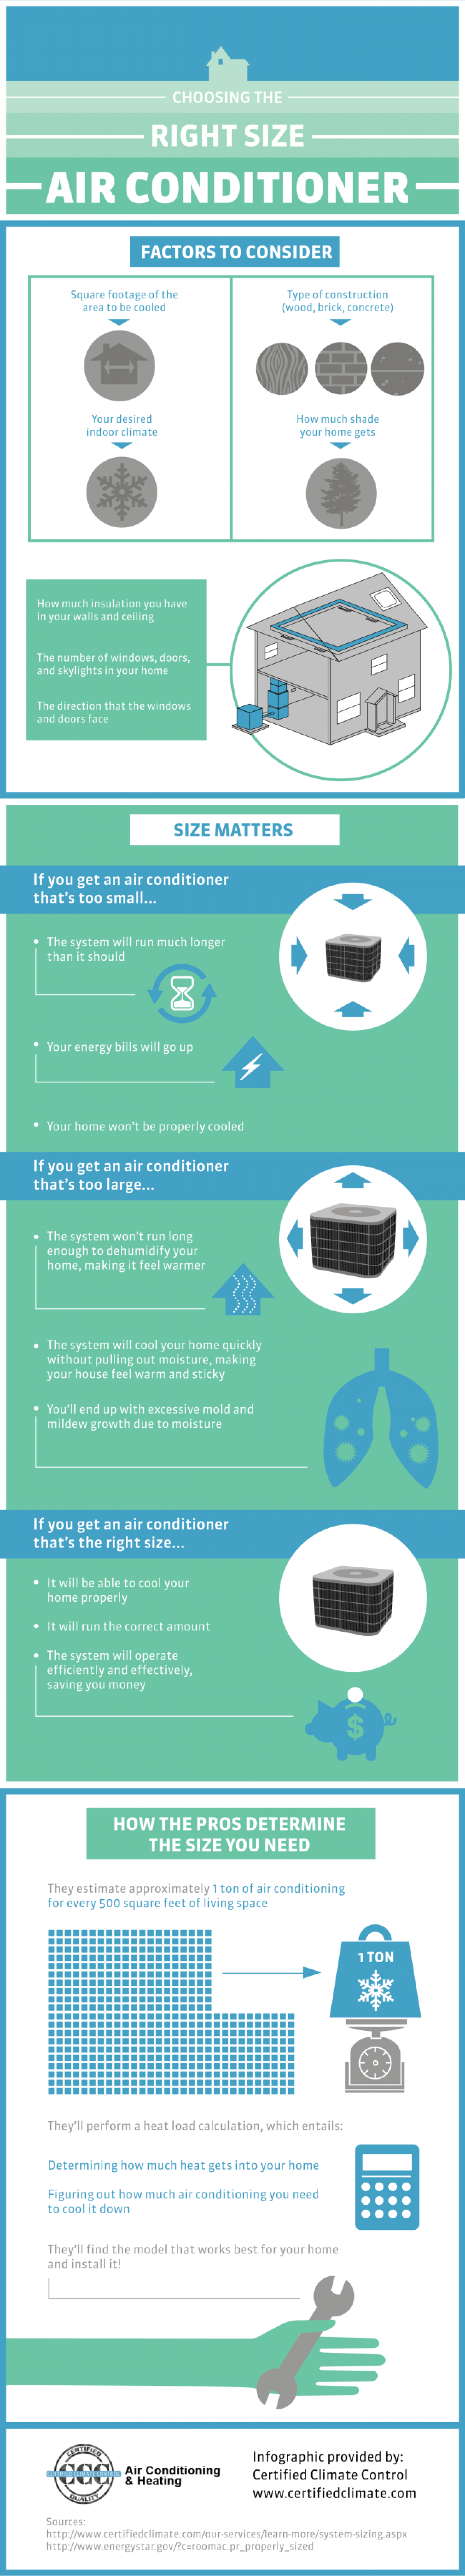 Choosing the Right Size Air Conditioner Infographic